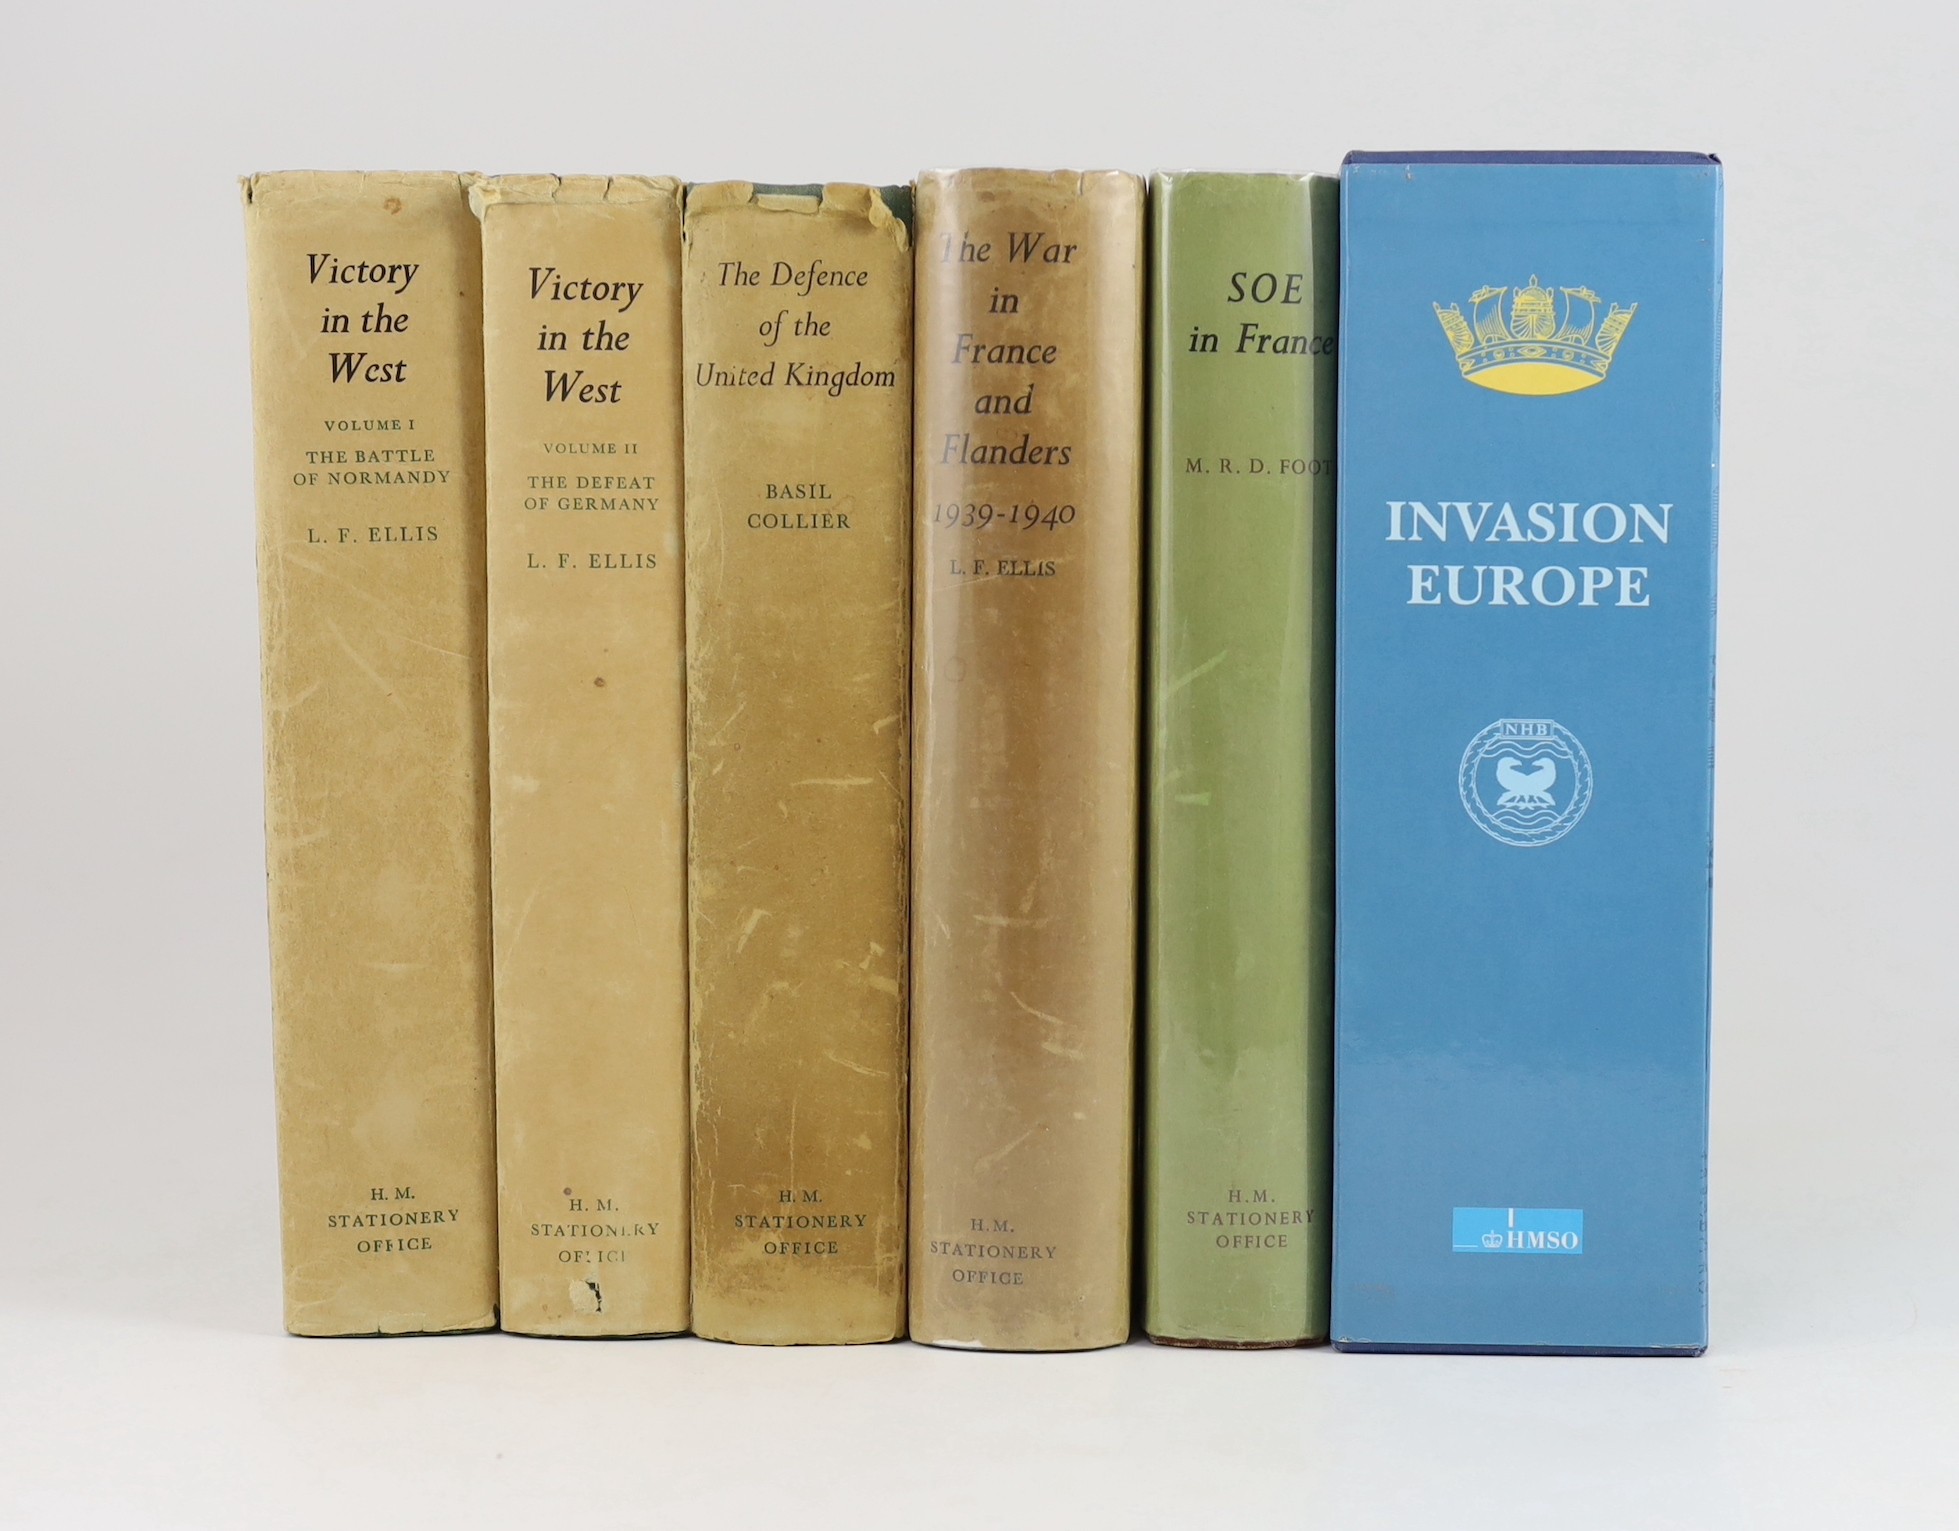 History of the Second World War - 5 works - Ellis, L.F (Maj.) - Victory in the West, 2 vols, 1962-68; and The War in France and Flanders 1939-1940, 1953; Collier, Basil - The Defence of the United Kingdom, 1957; Foot, M.